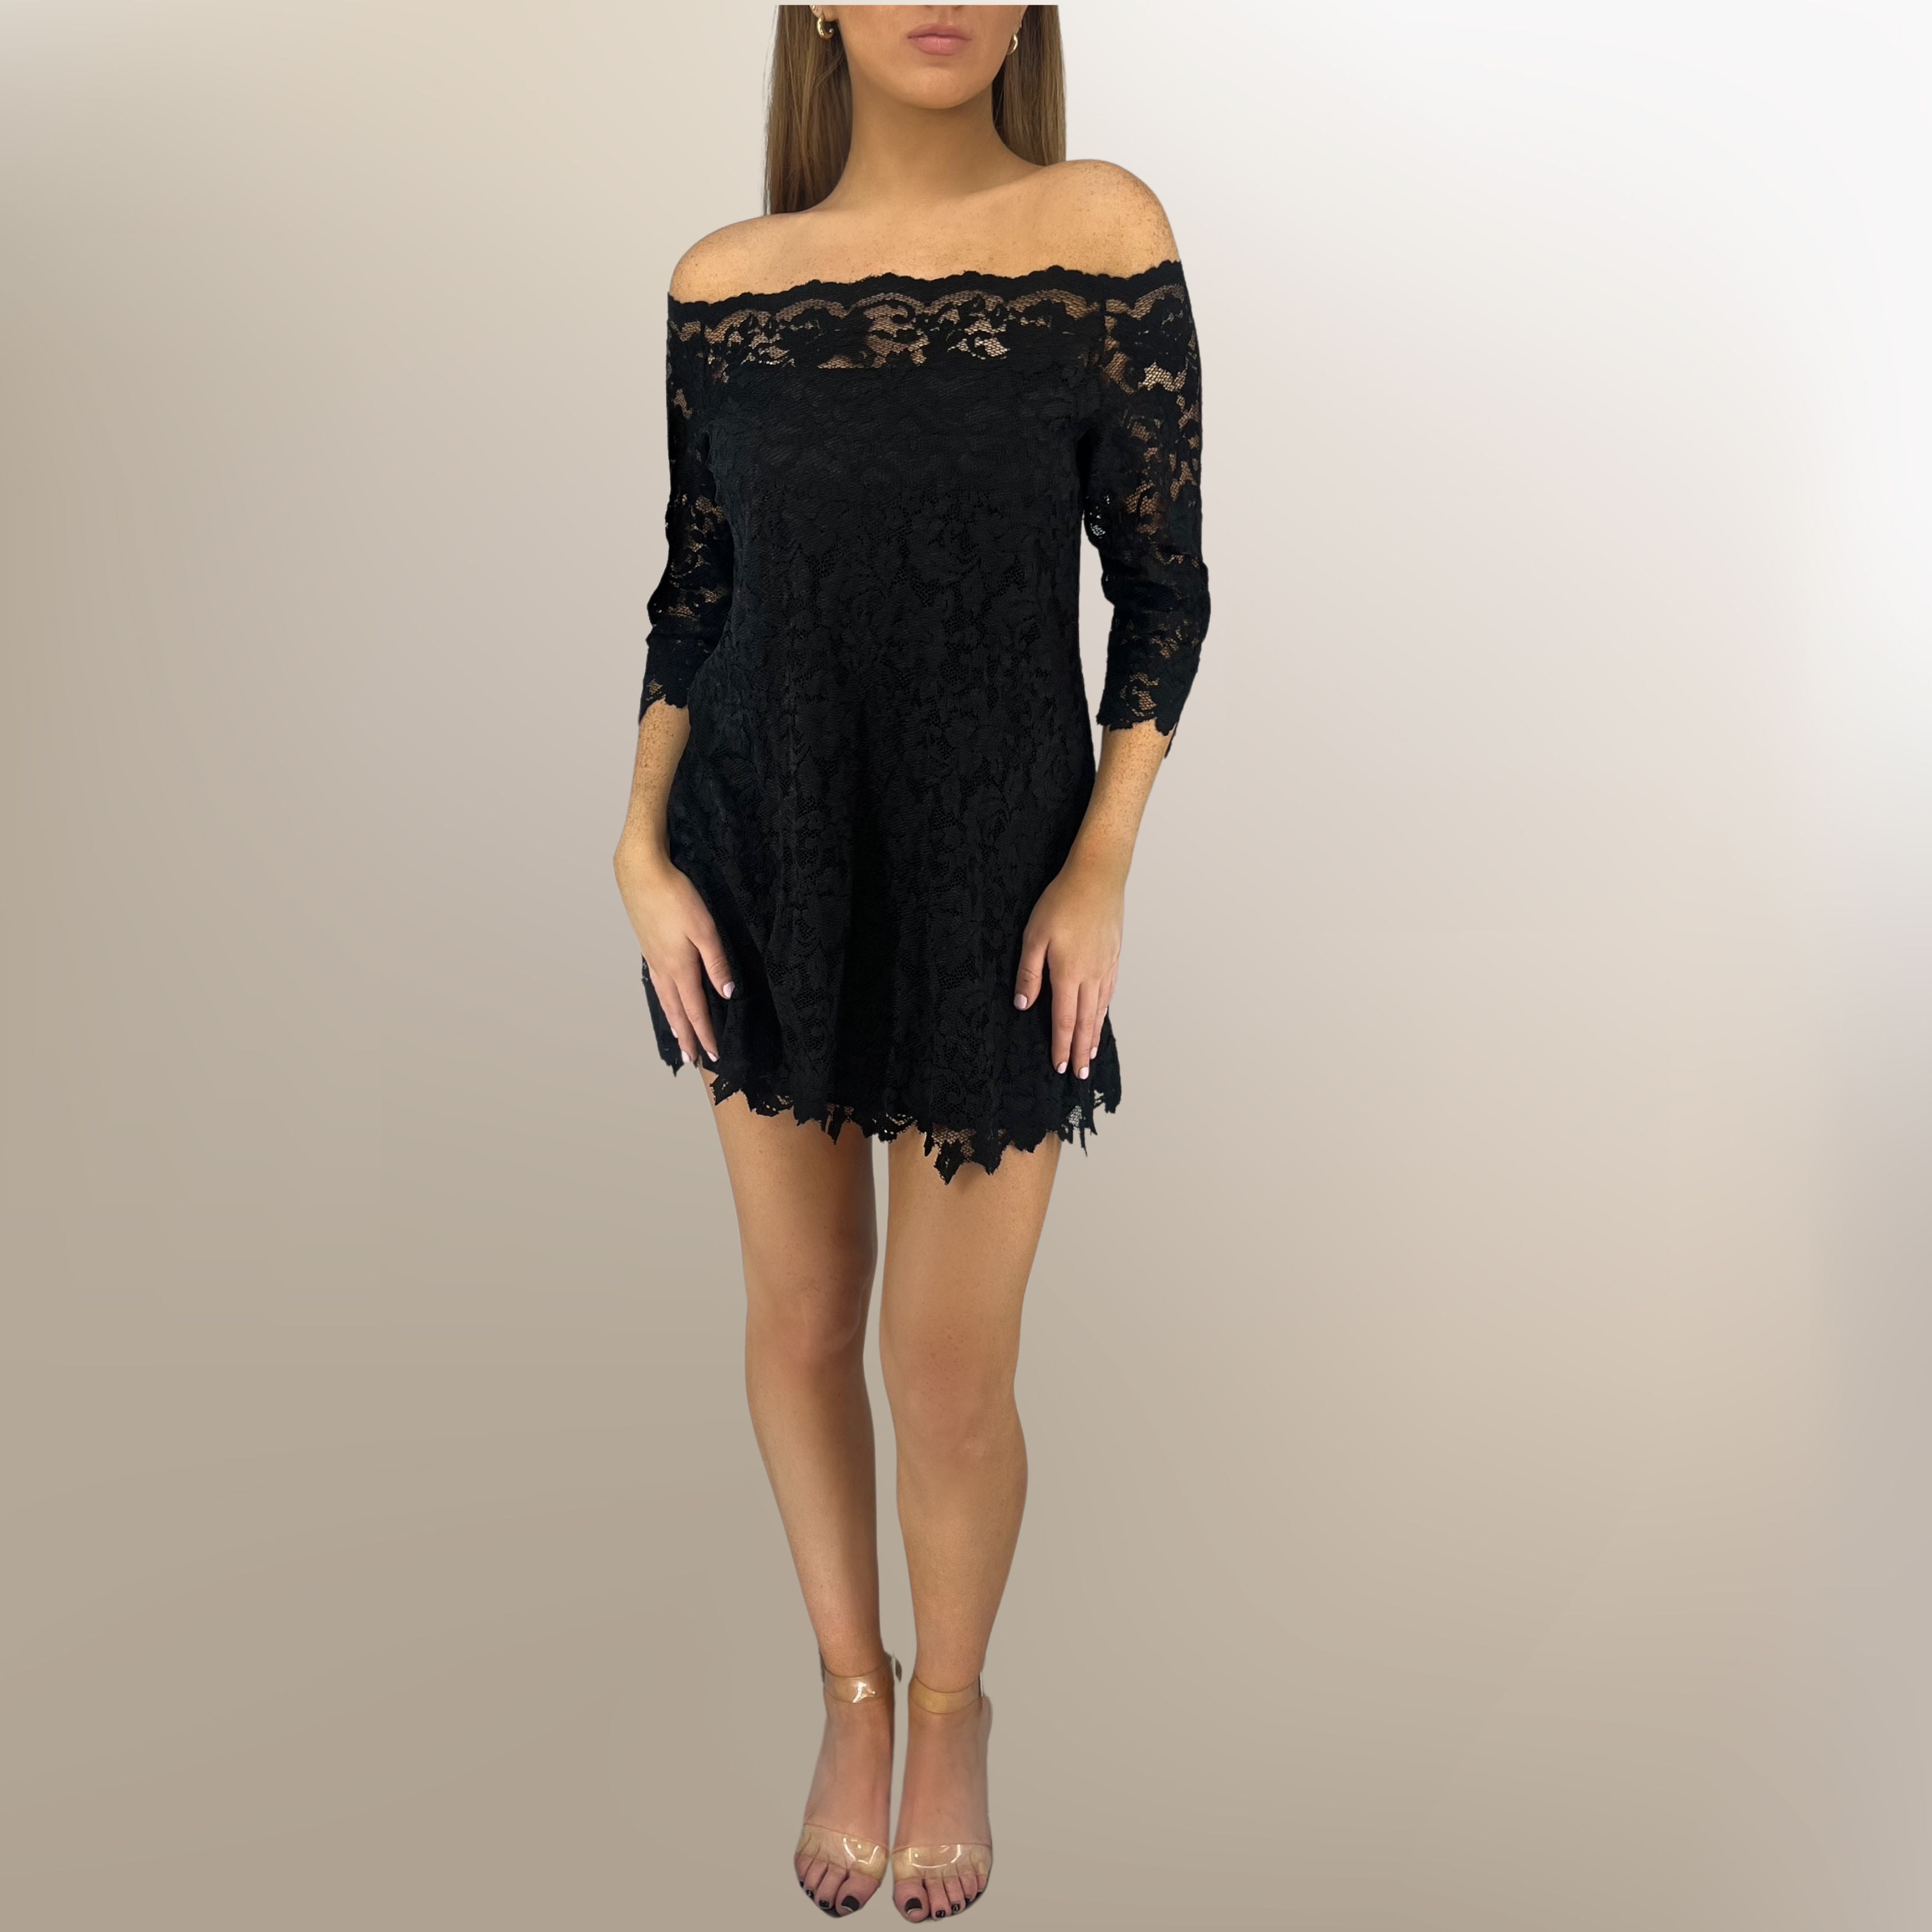 French Rose Lace Top - Sara Mique Evening Wear